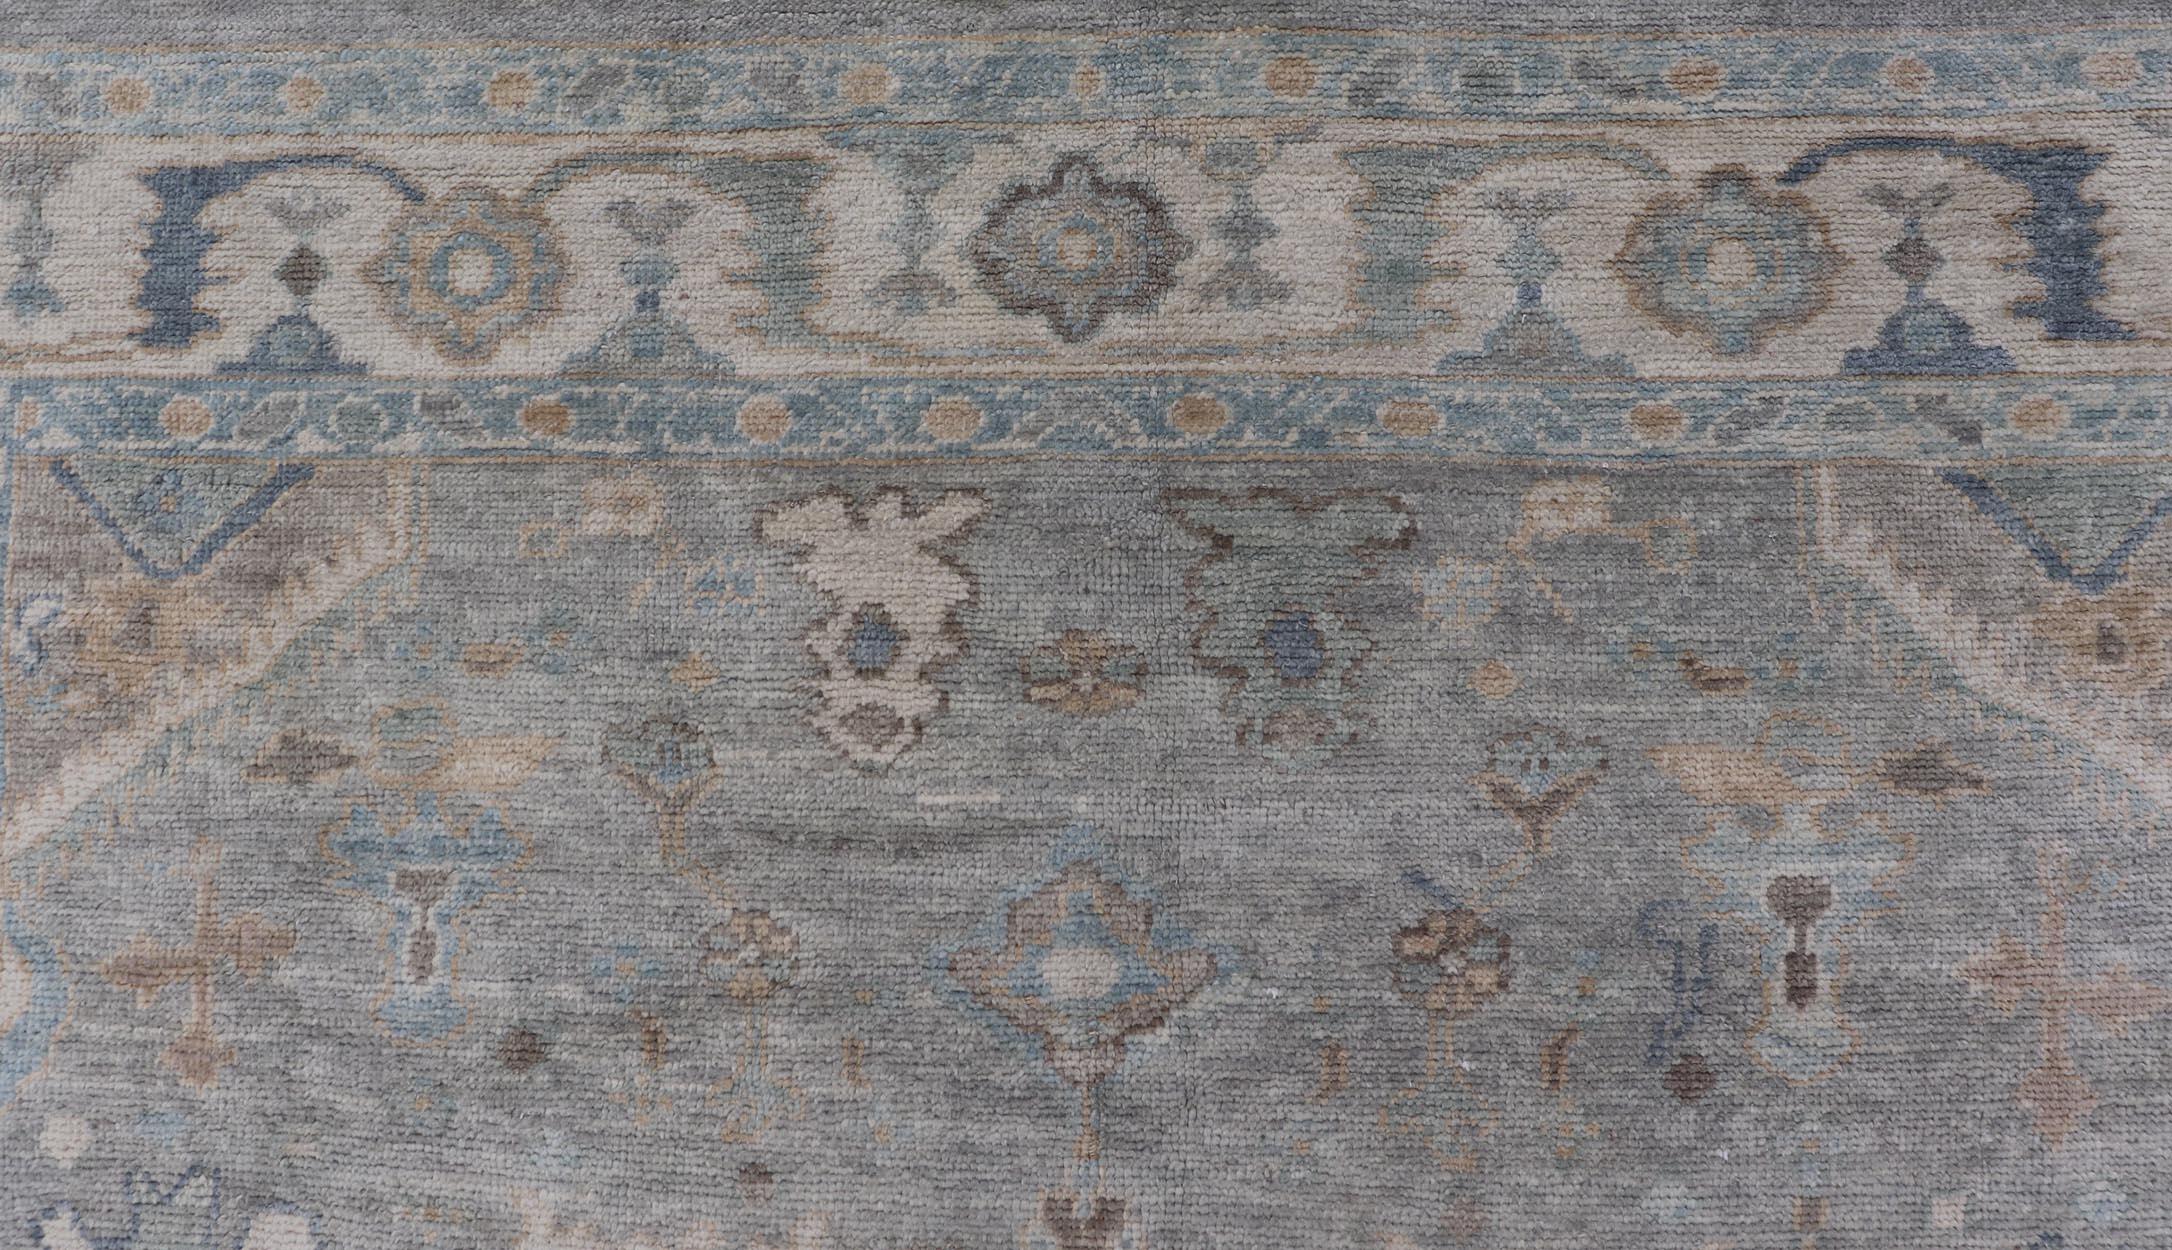 Turkish Modern Oushak Rug in Medallion Design in Gray-Blue, and Marigold  For Sale 2